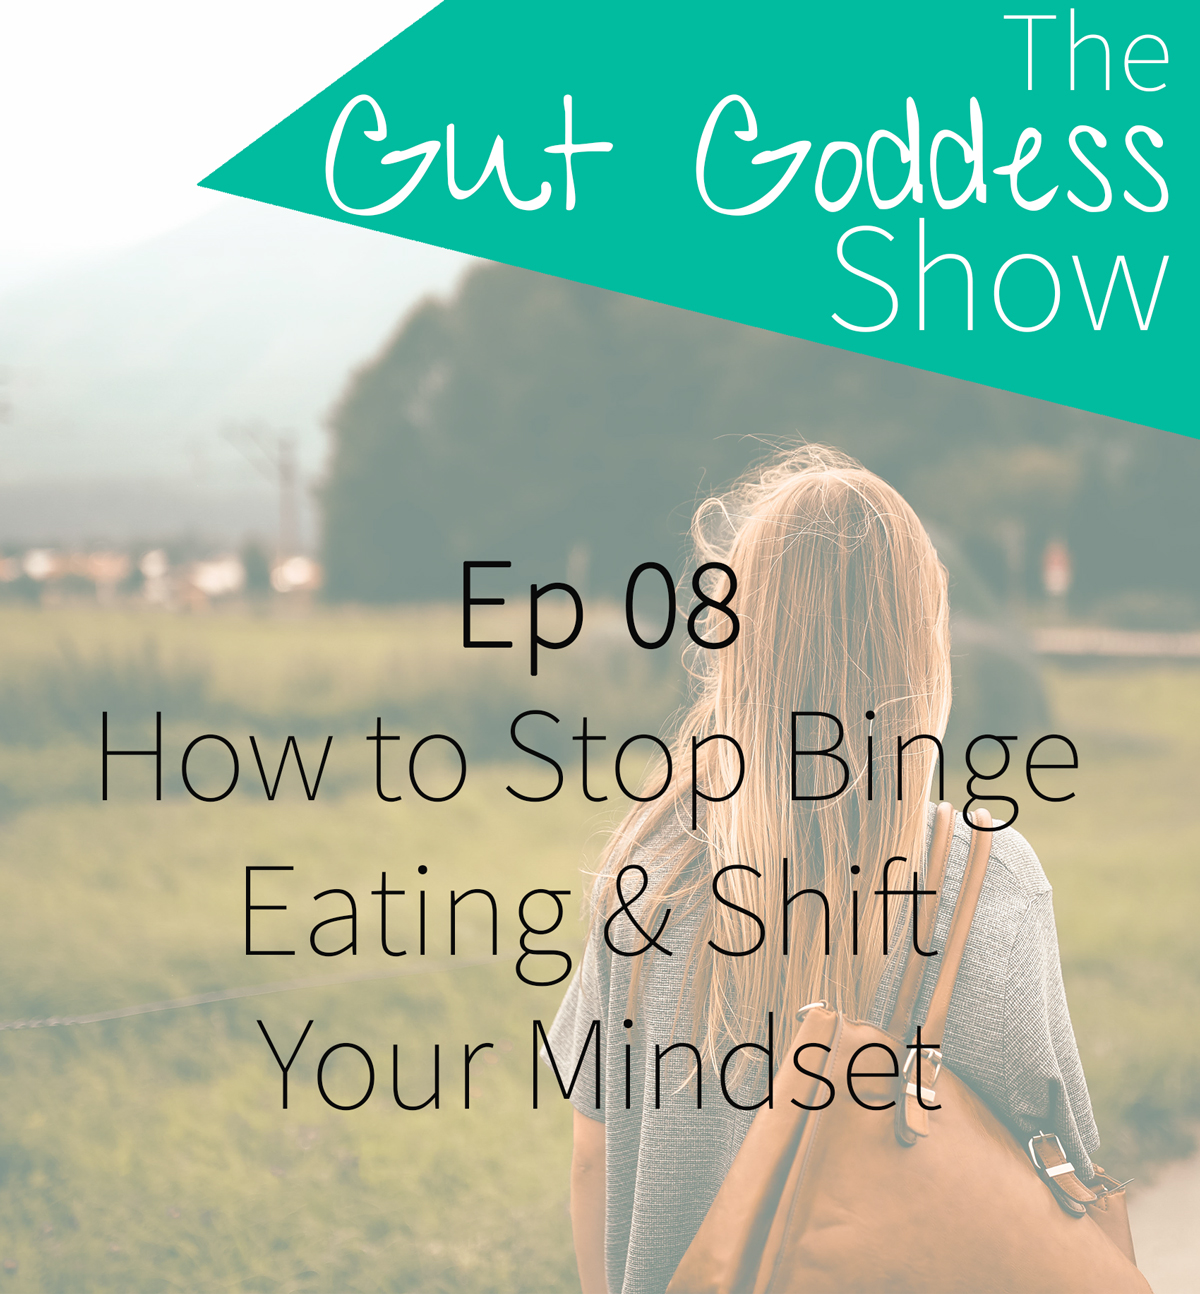 Ep 08: How to Stop Binge Eating & Shift Your Mindset with Laura Agar Wilson